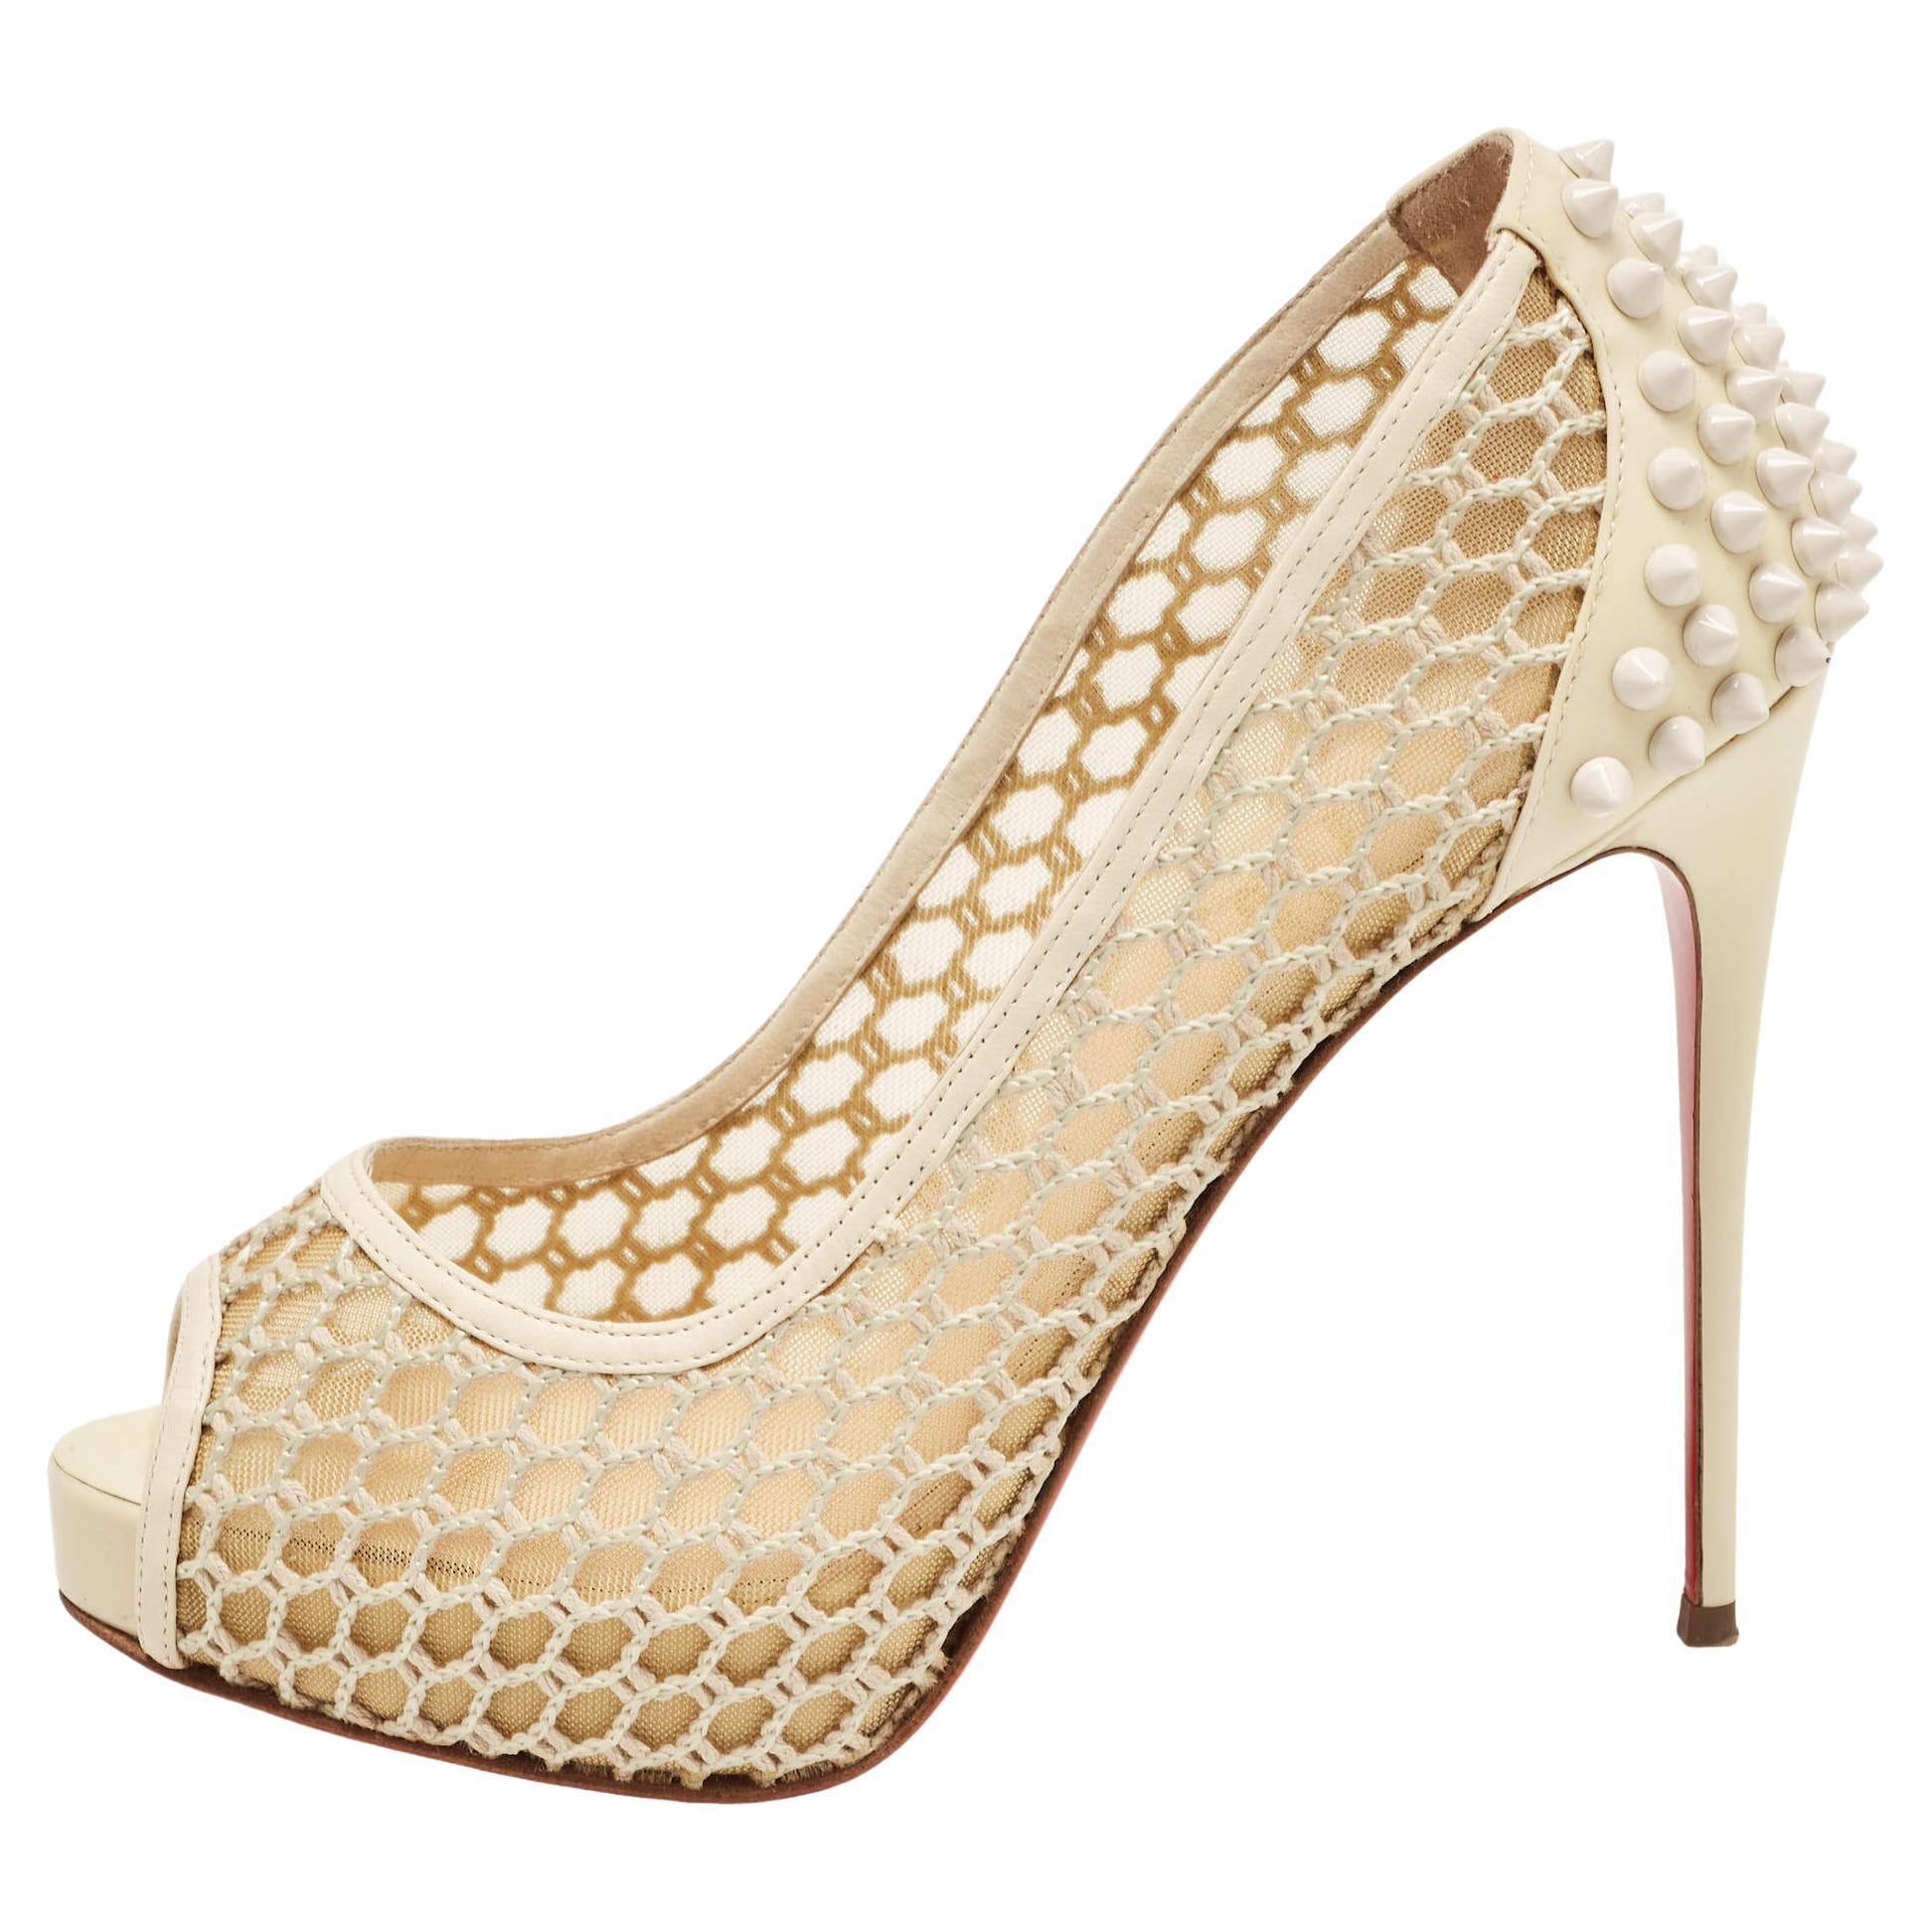 Christian Louboutin Cream Patent Leather and Mesh Guni Spiked Peep Toe Pumps Siz For Sale